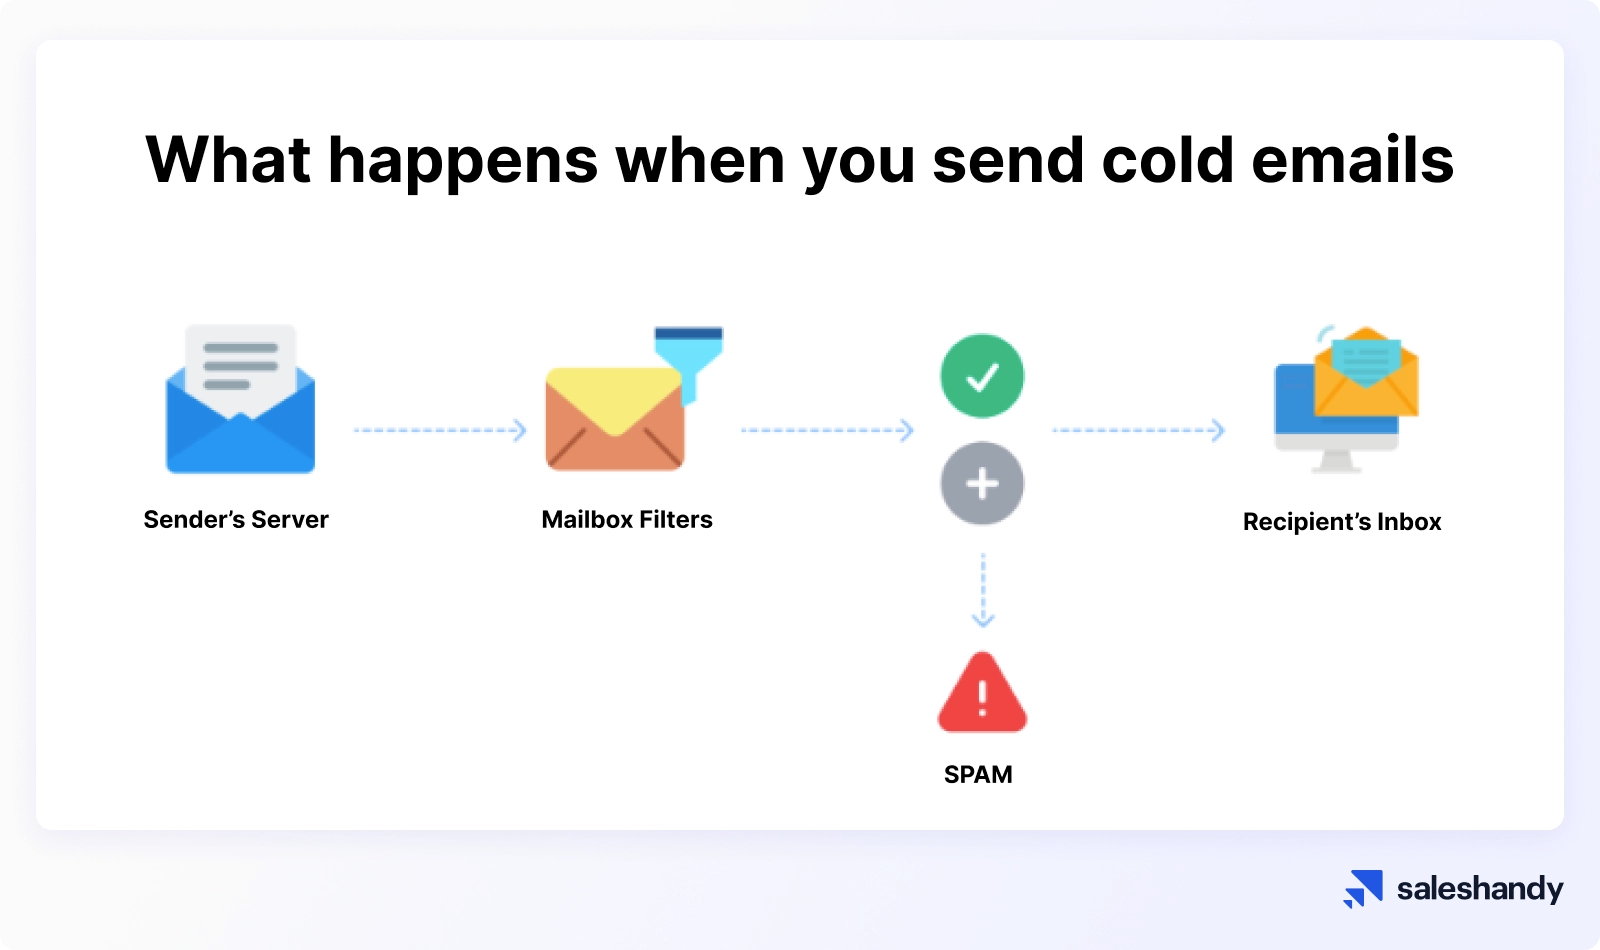 What happens when you send cold emails